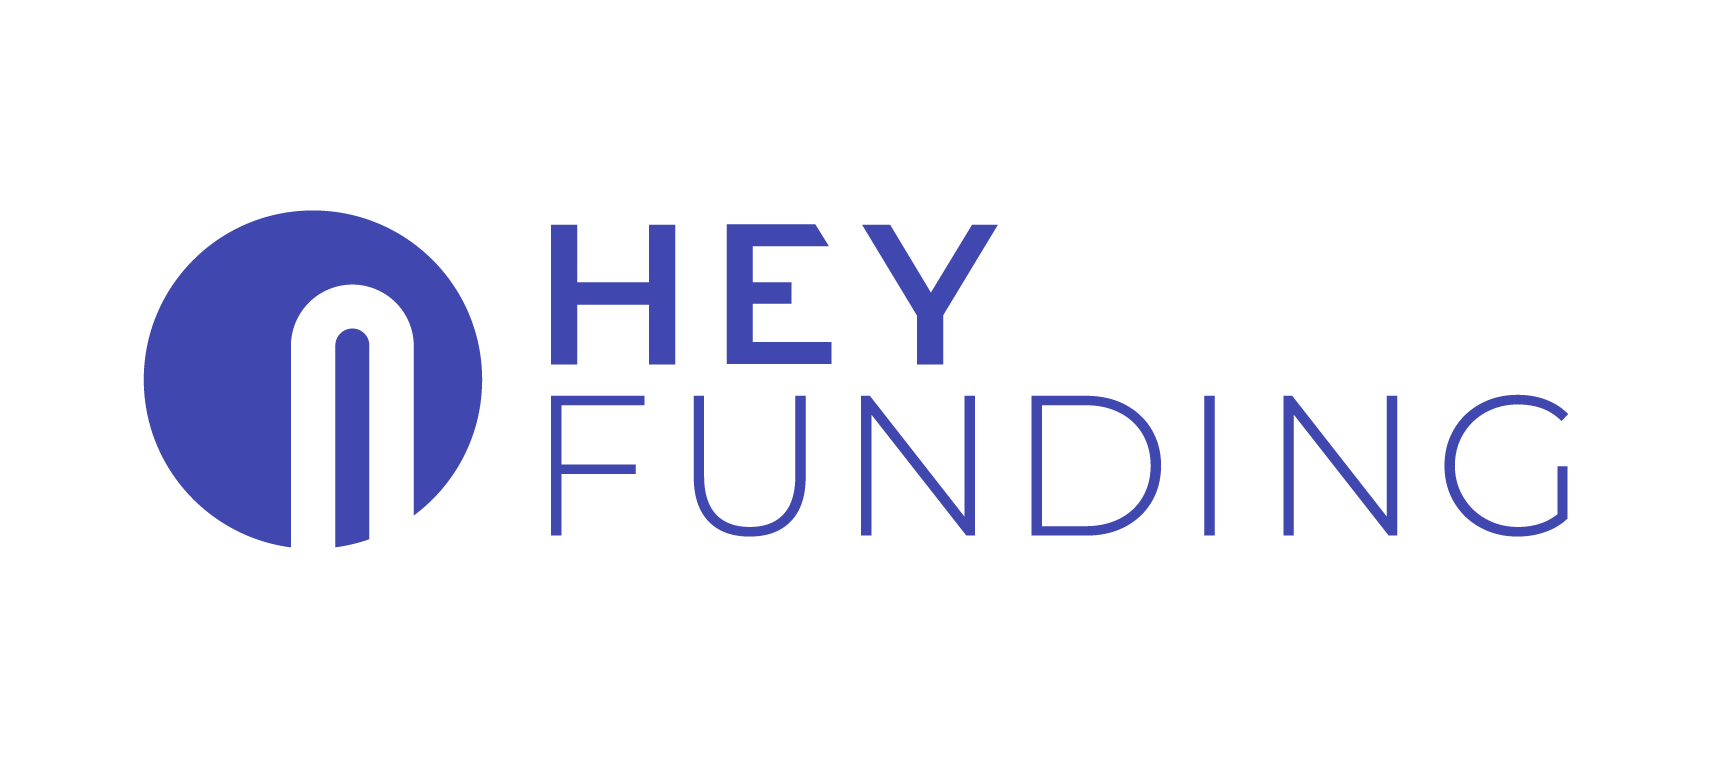 Fantastic news! – CES has been awarded the Heyfunding grant along with a 25,000 DKK prize